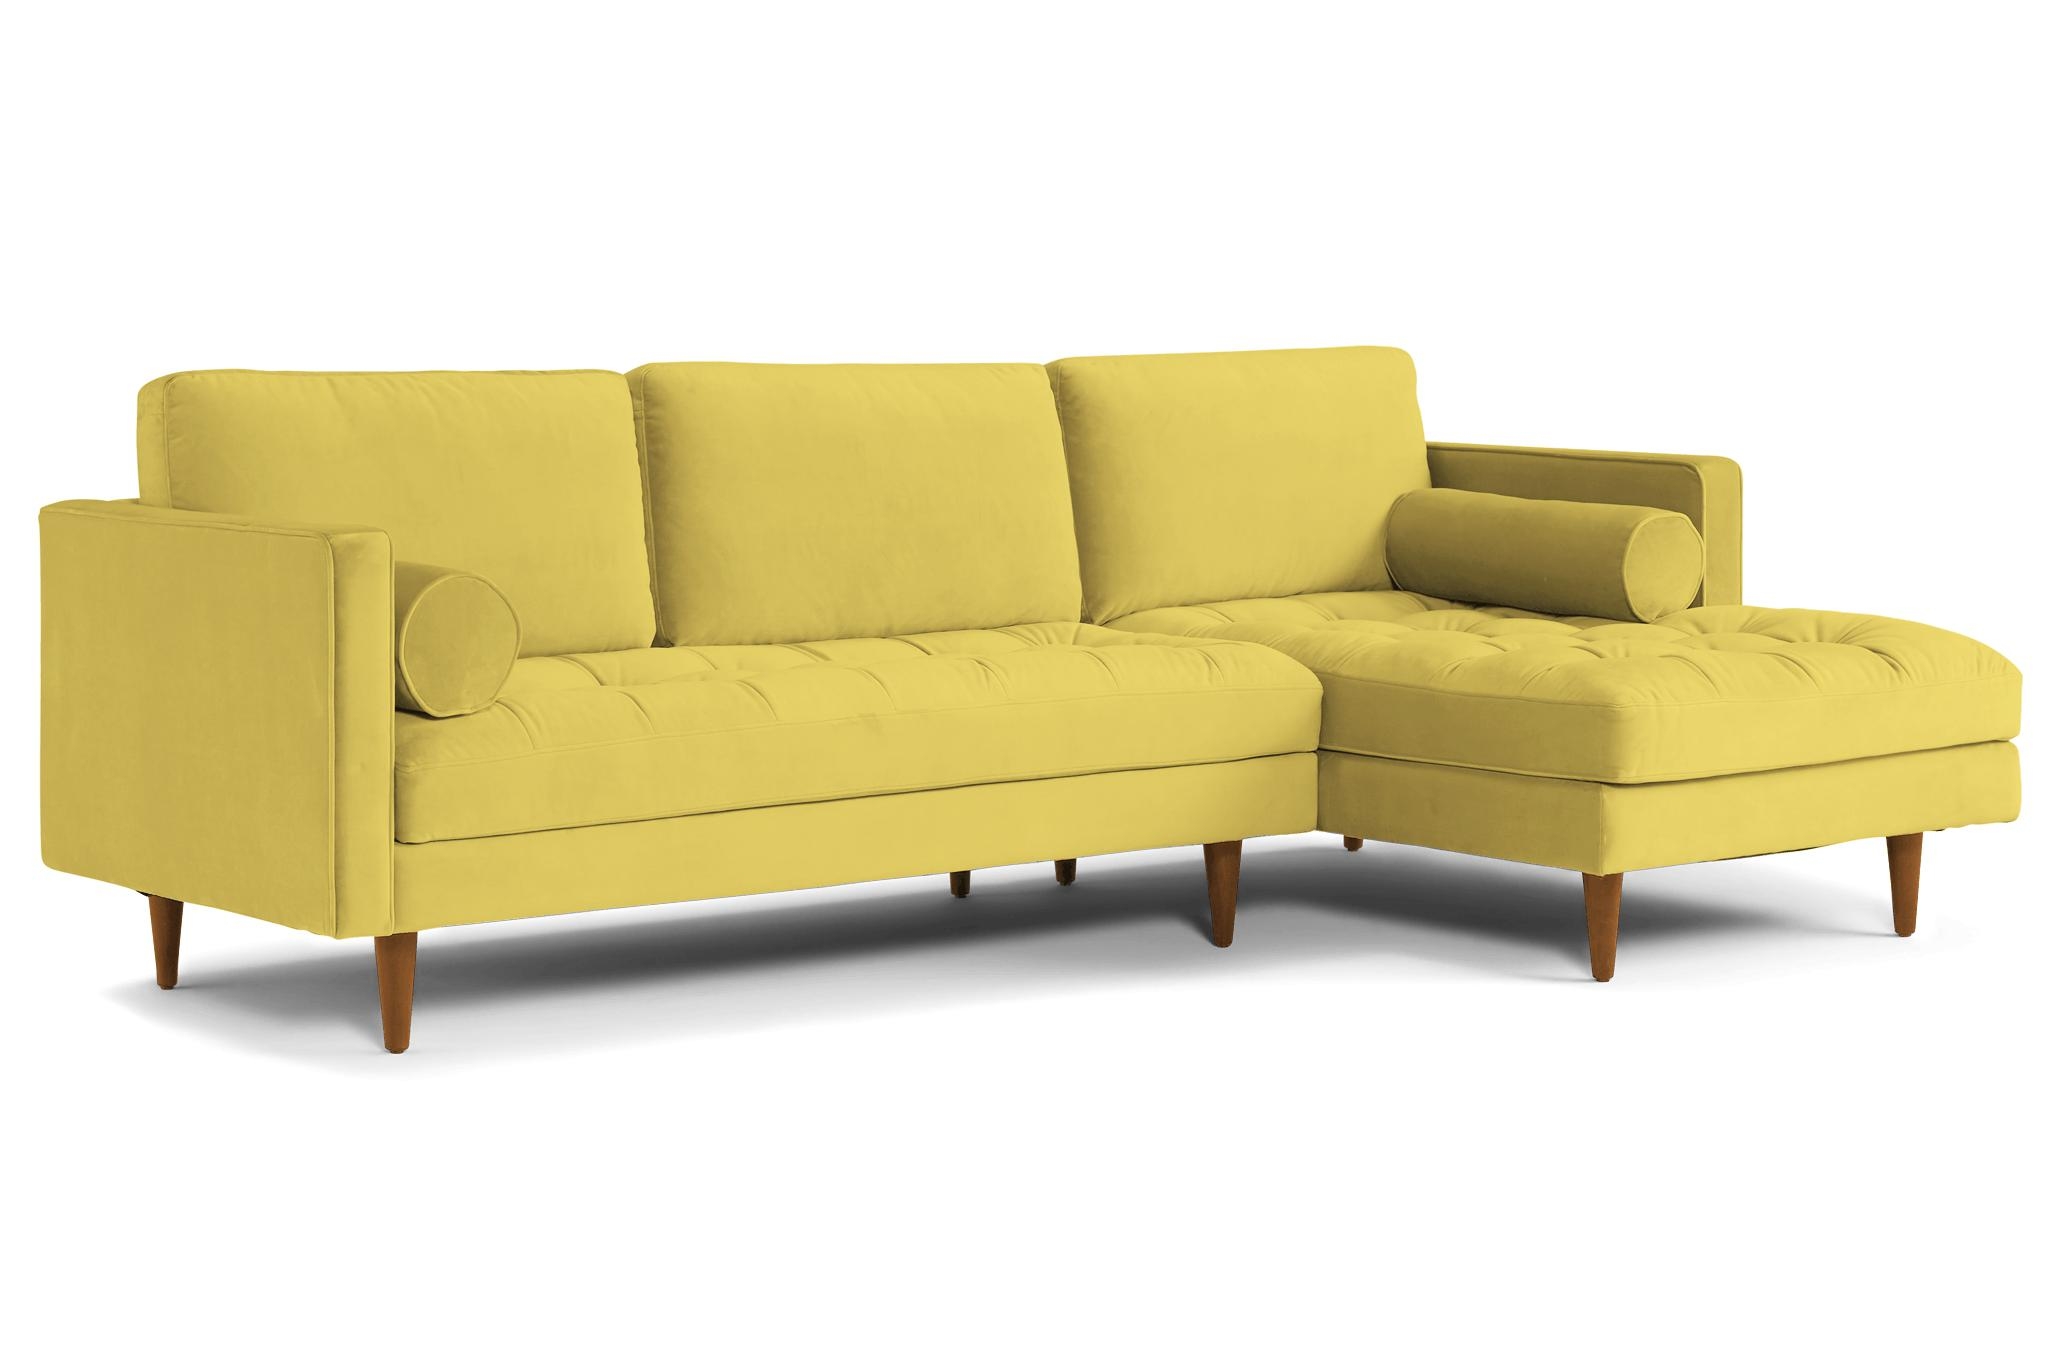 Yellow Briar Mid Century Modern Sectional - Taylor Golden - Mocha - Left - Image 1